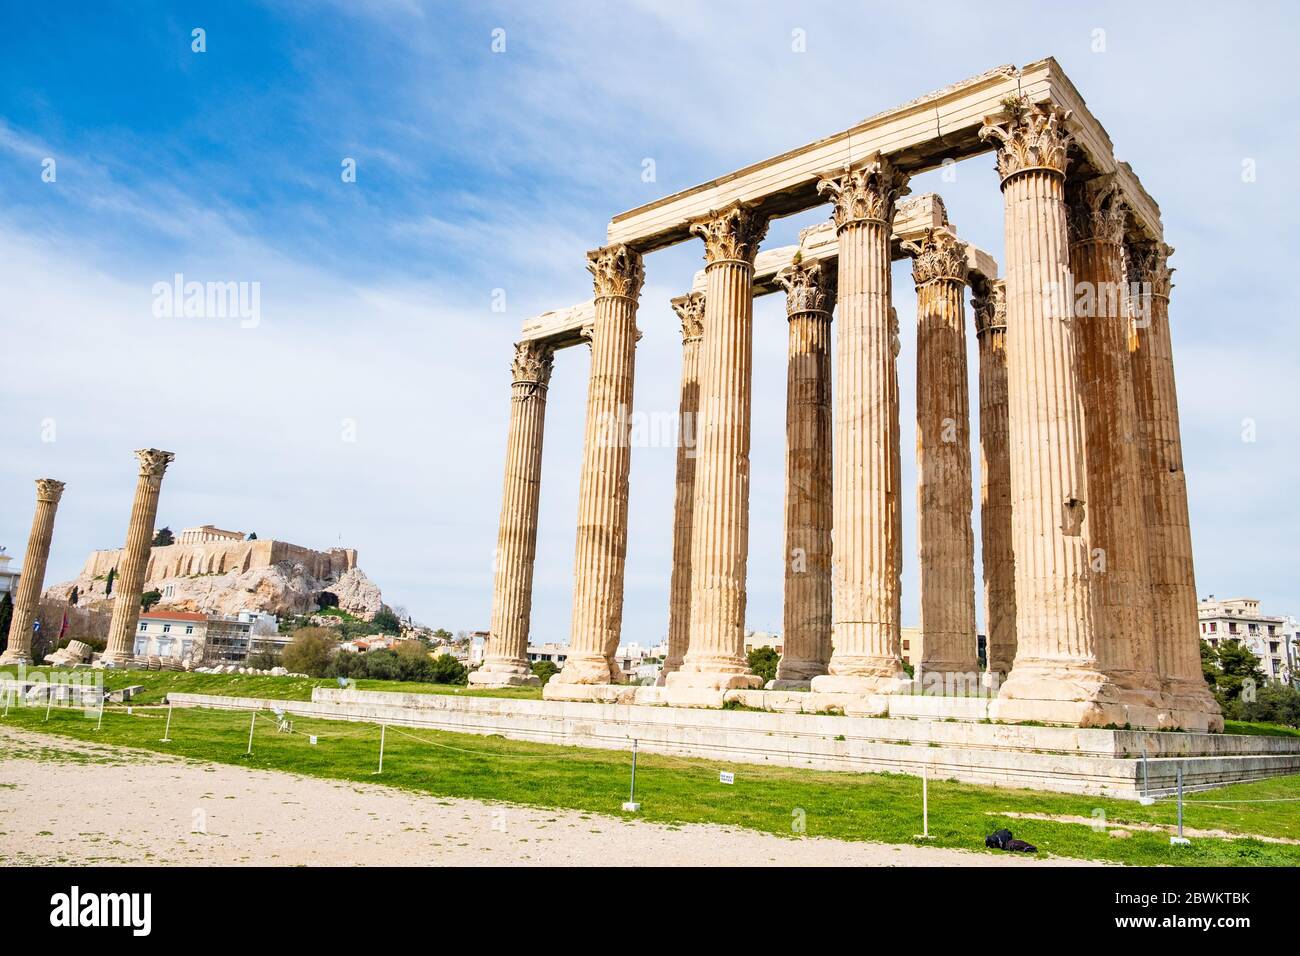 Ruins of the ancient Temple of Olympian Zeus in Athens (Olympieion or Columns of the Olympian Zeus) with Acropolis hill in the background Stock Photo